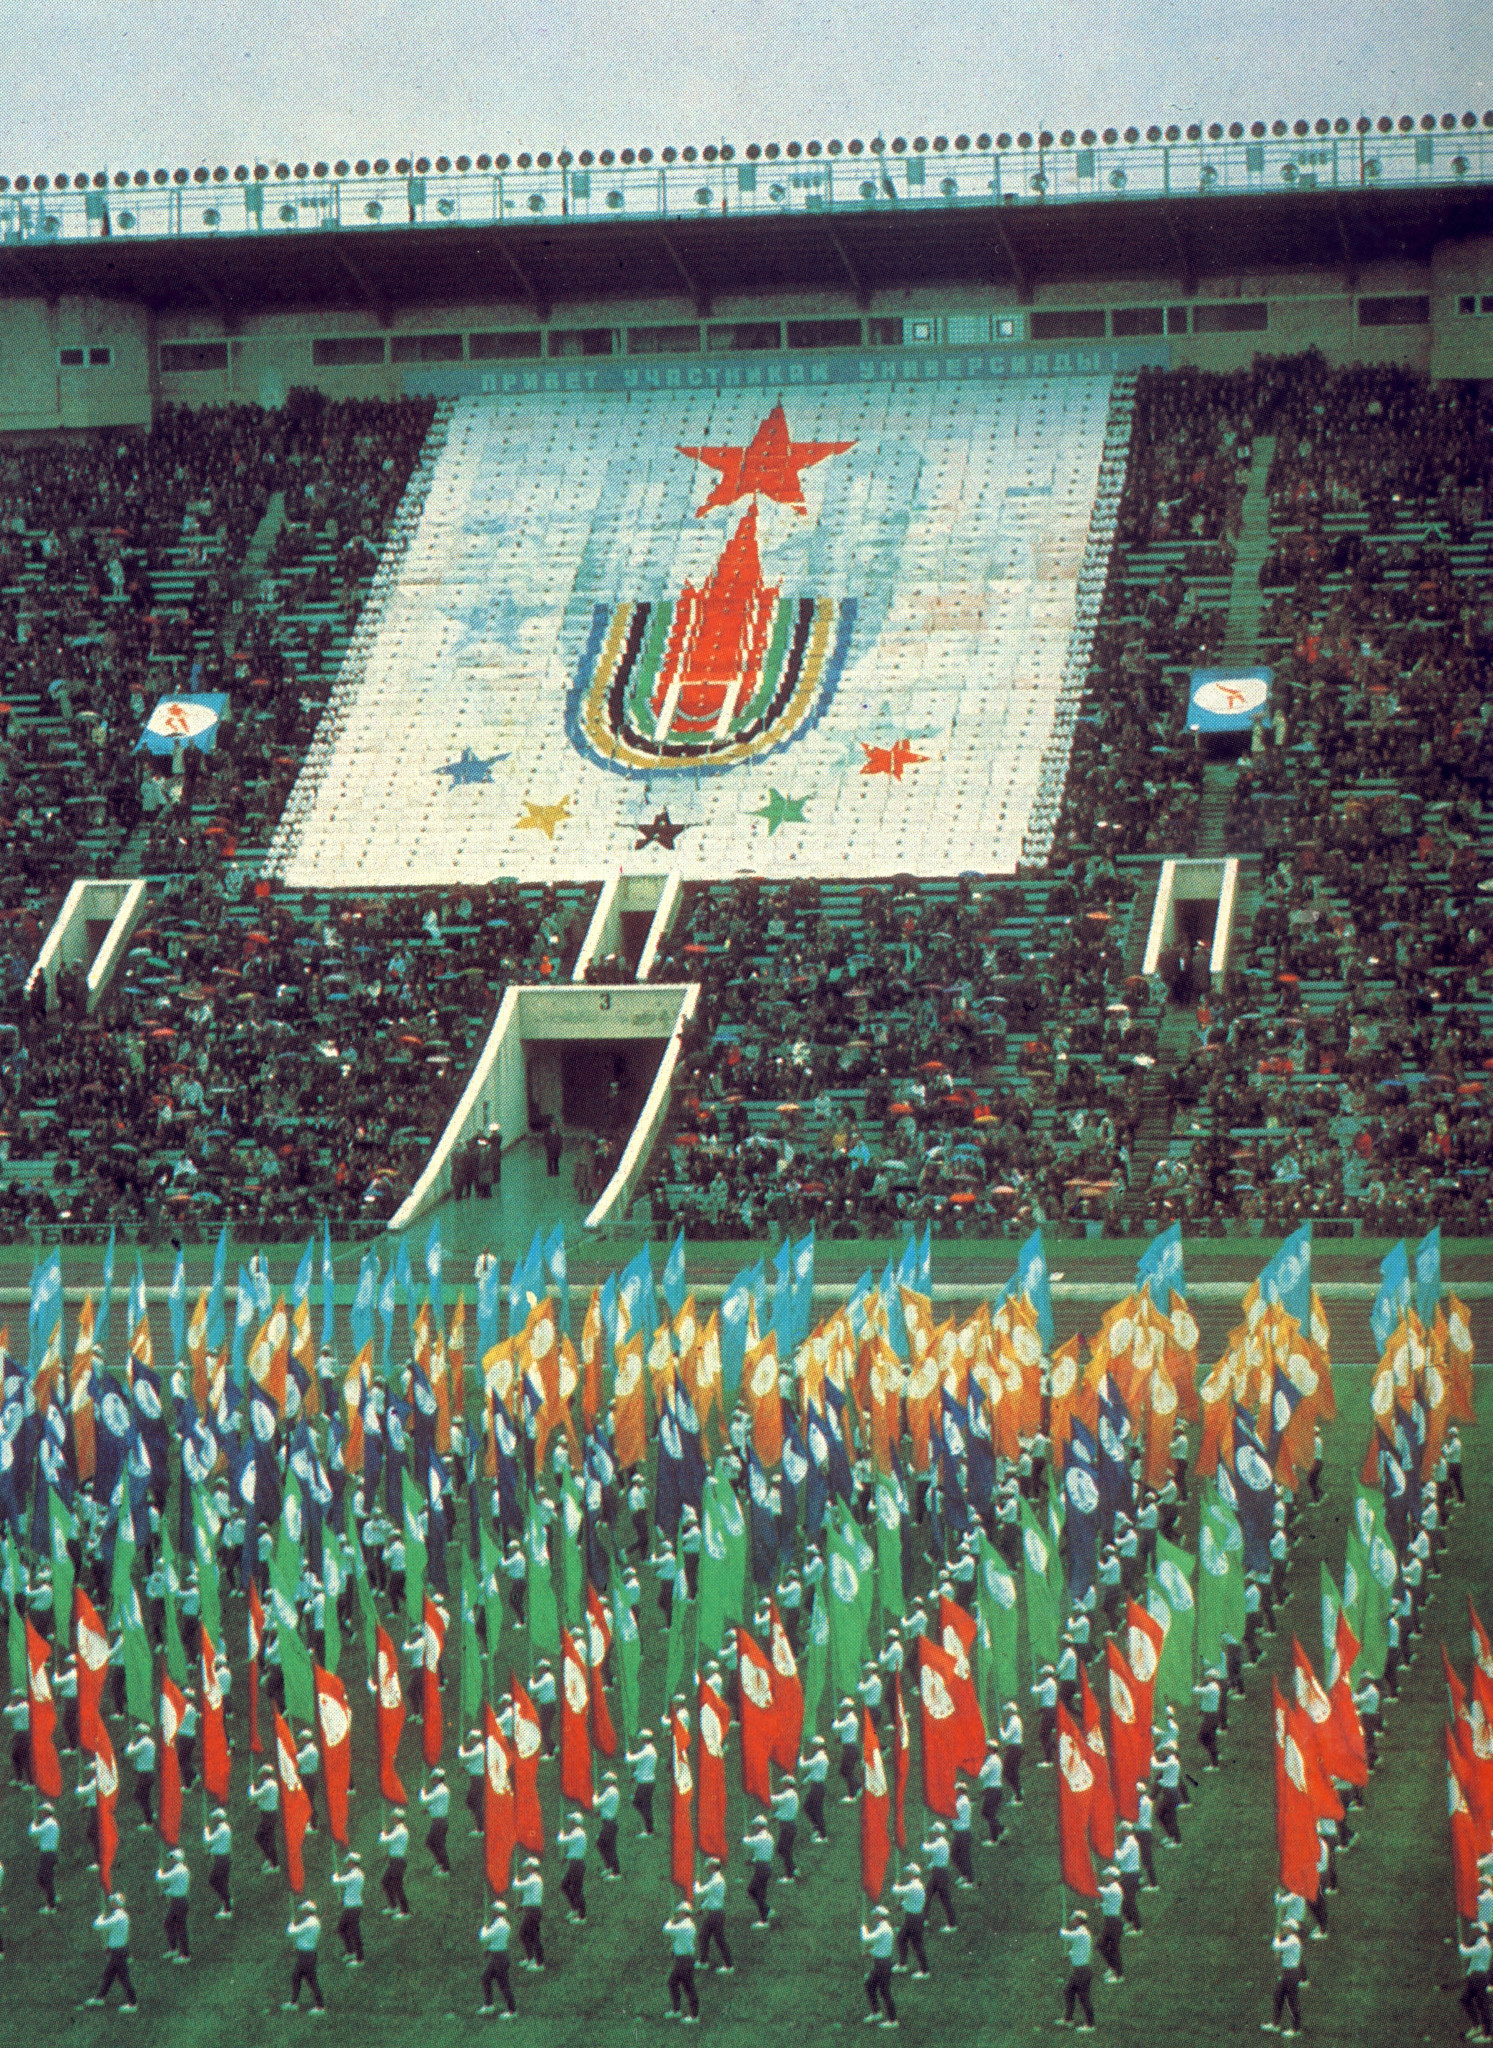 More than 70 countries took part in the 1973 Universiade in Moscow, an event the Soviet Union used to showcase its bid for the 1980 Olympic Games, which they were officially awarded by the IOC the following year ©Progress Publishers Moscow